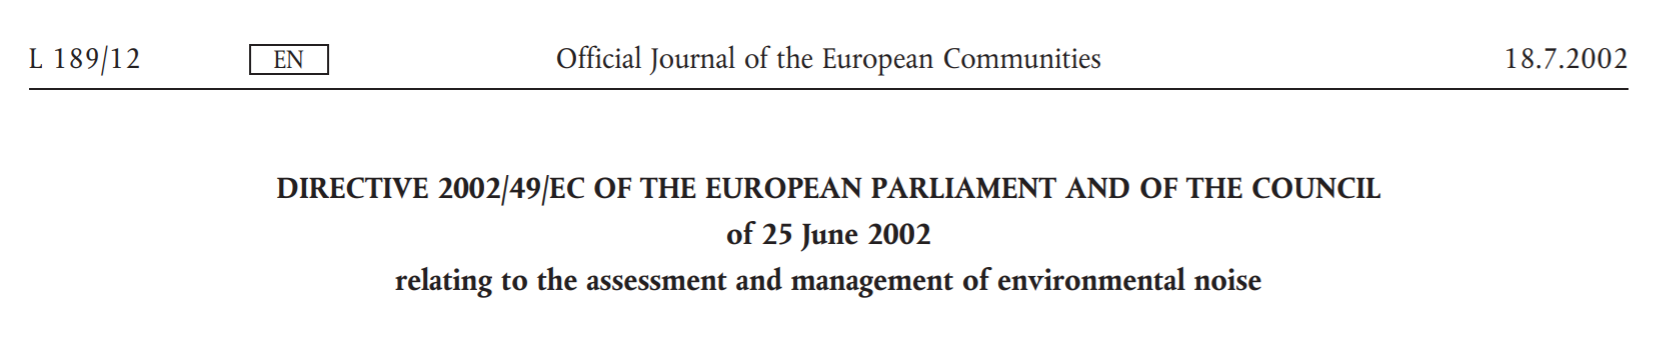 Directive 2002/49/EC of the European Parliament and of the Council of 25 June 2002 relating to the assessment and management of environmental noise